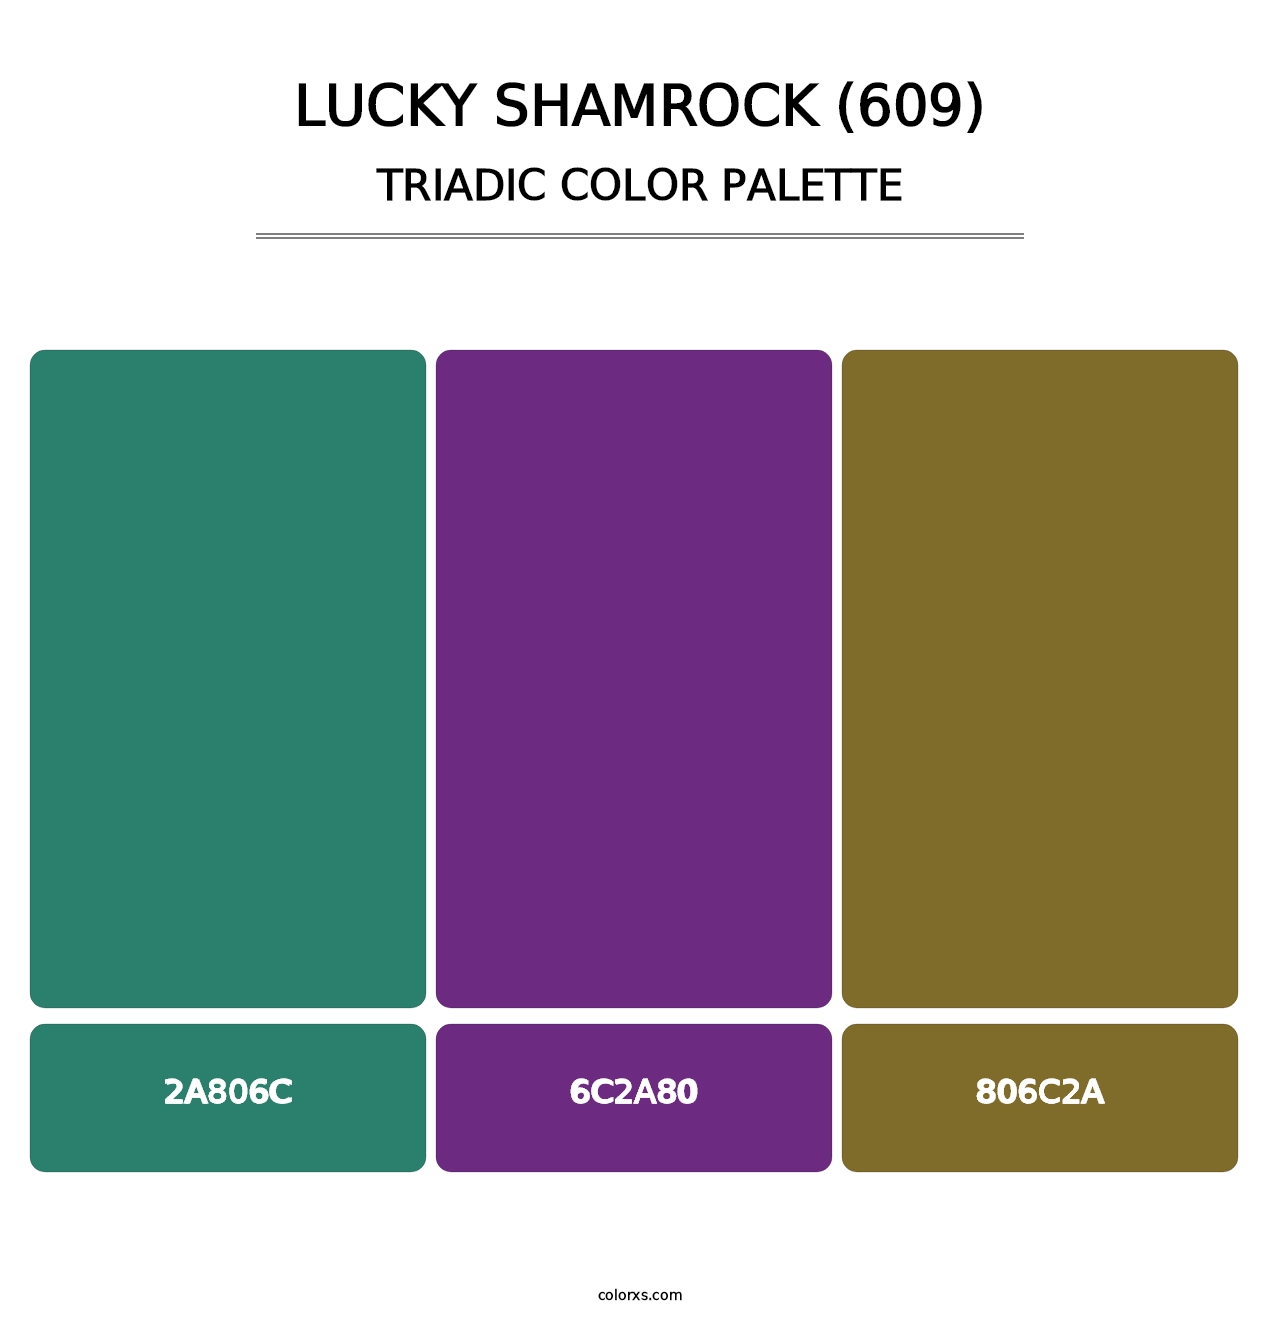 Lucky Shamrock (609) - Triadic Color Palette